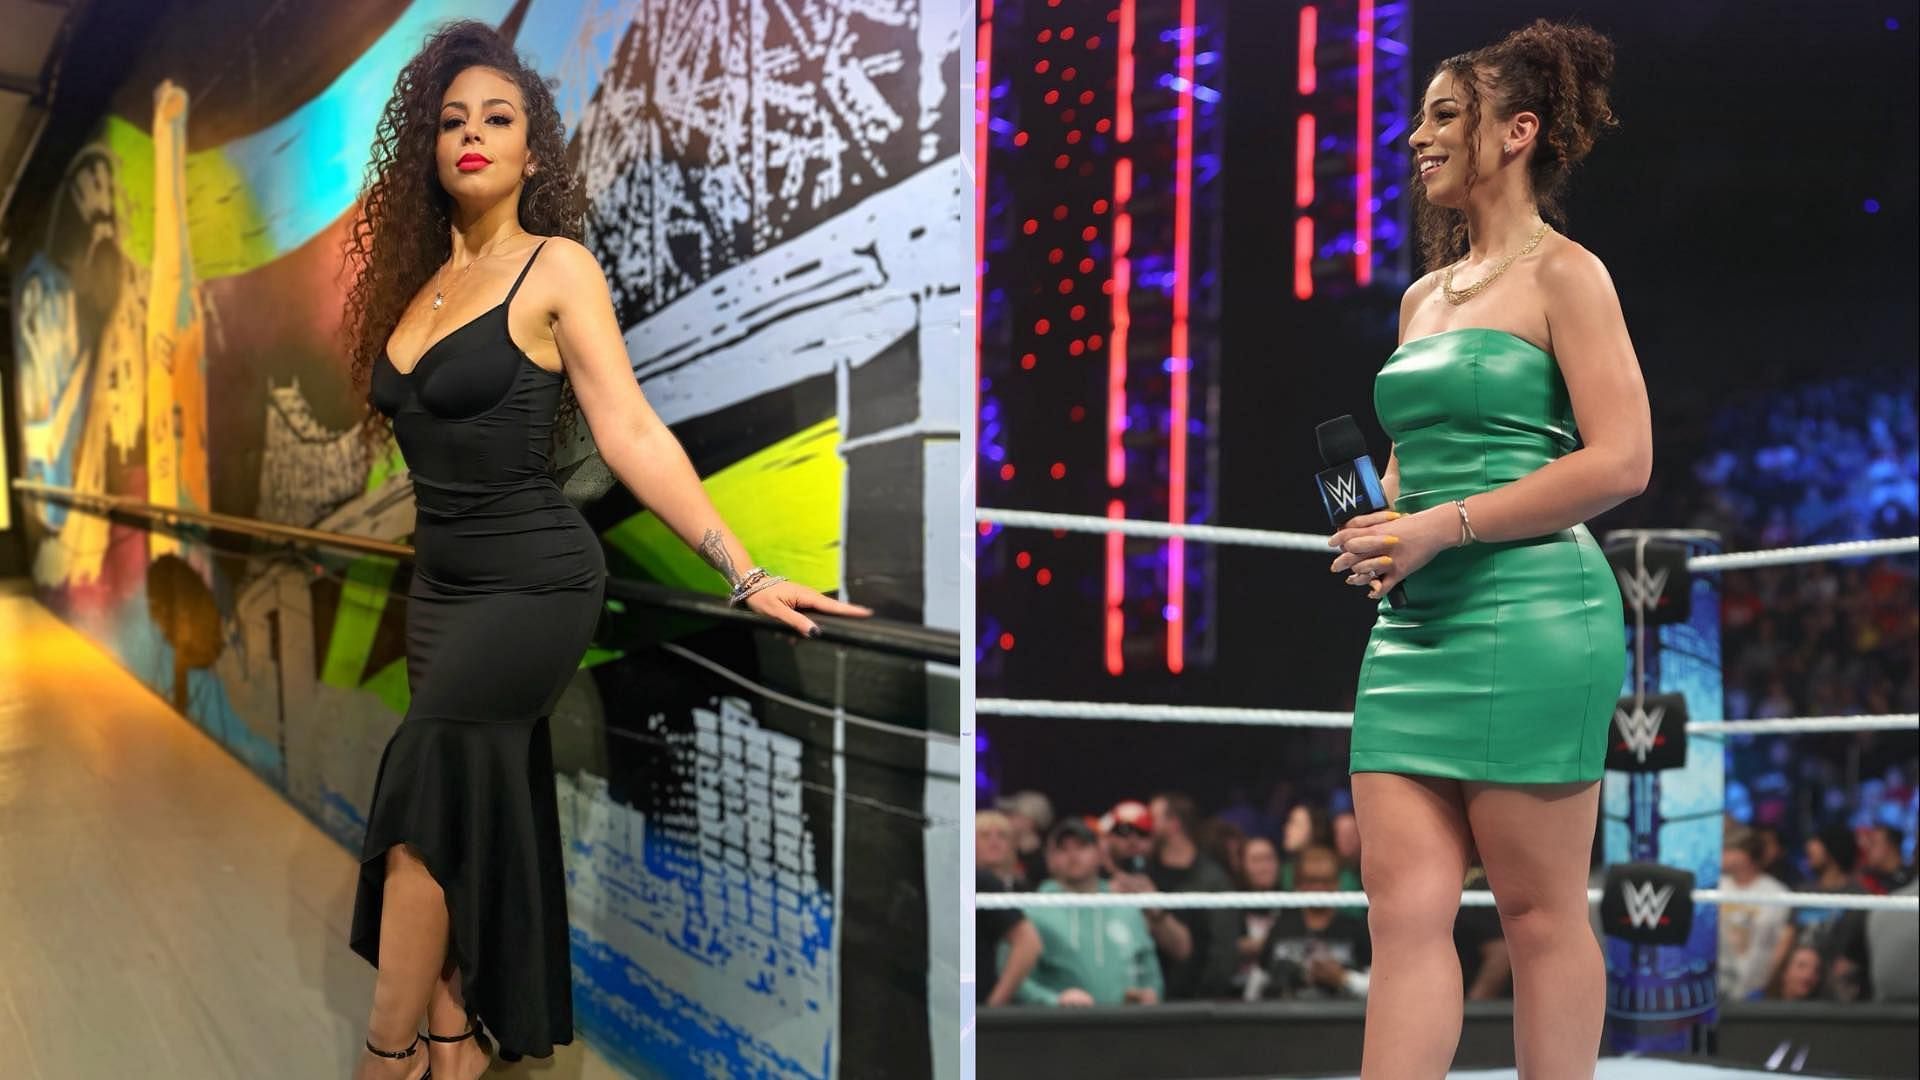 Samantha Irvin is massively popular for her ring announcing in WWE